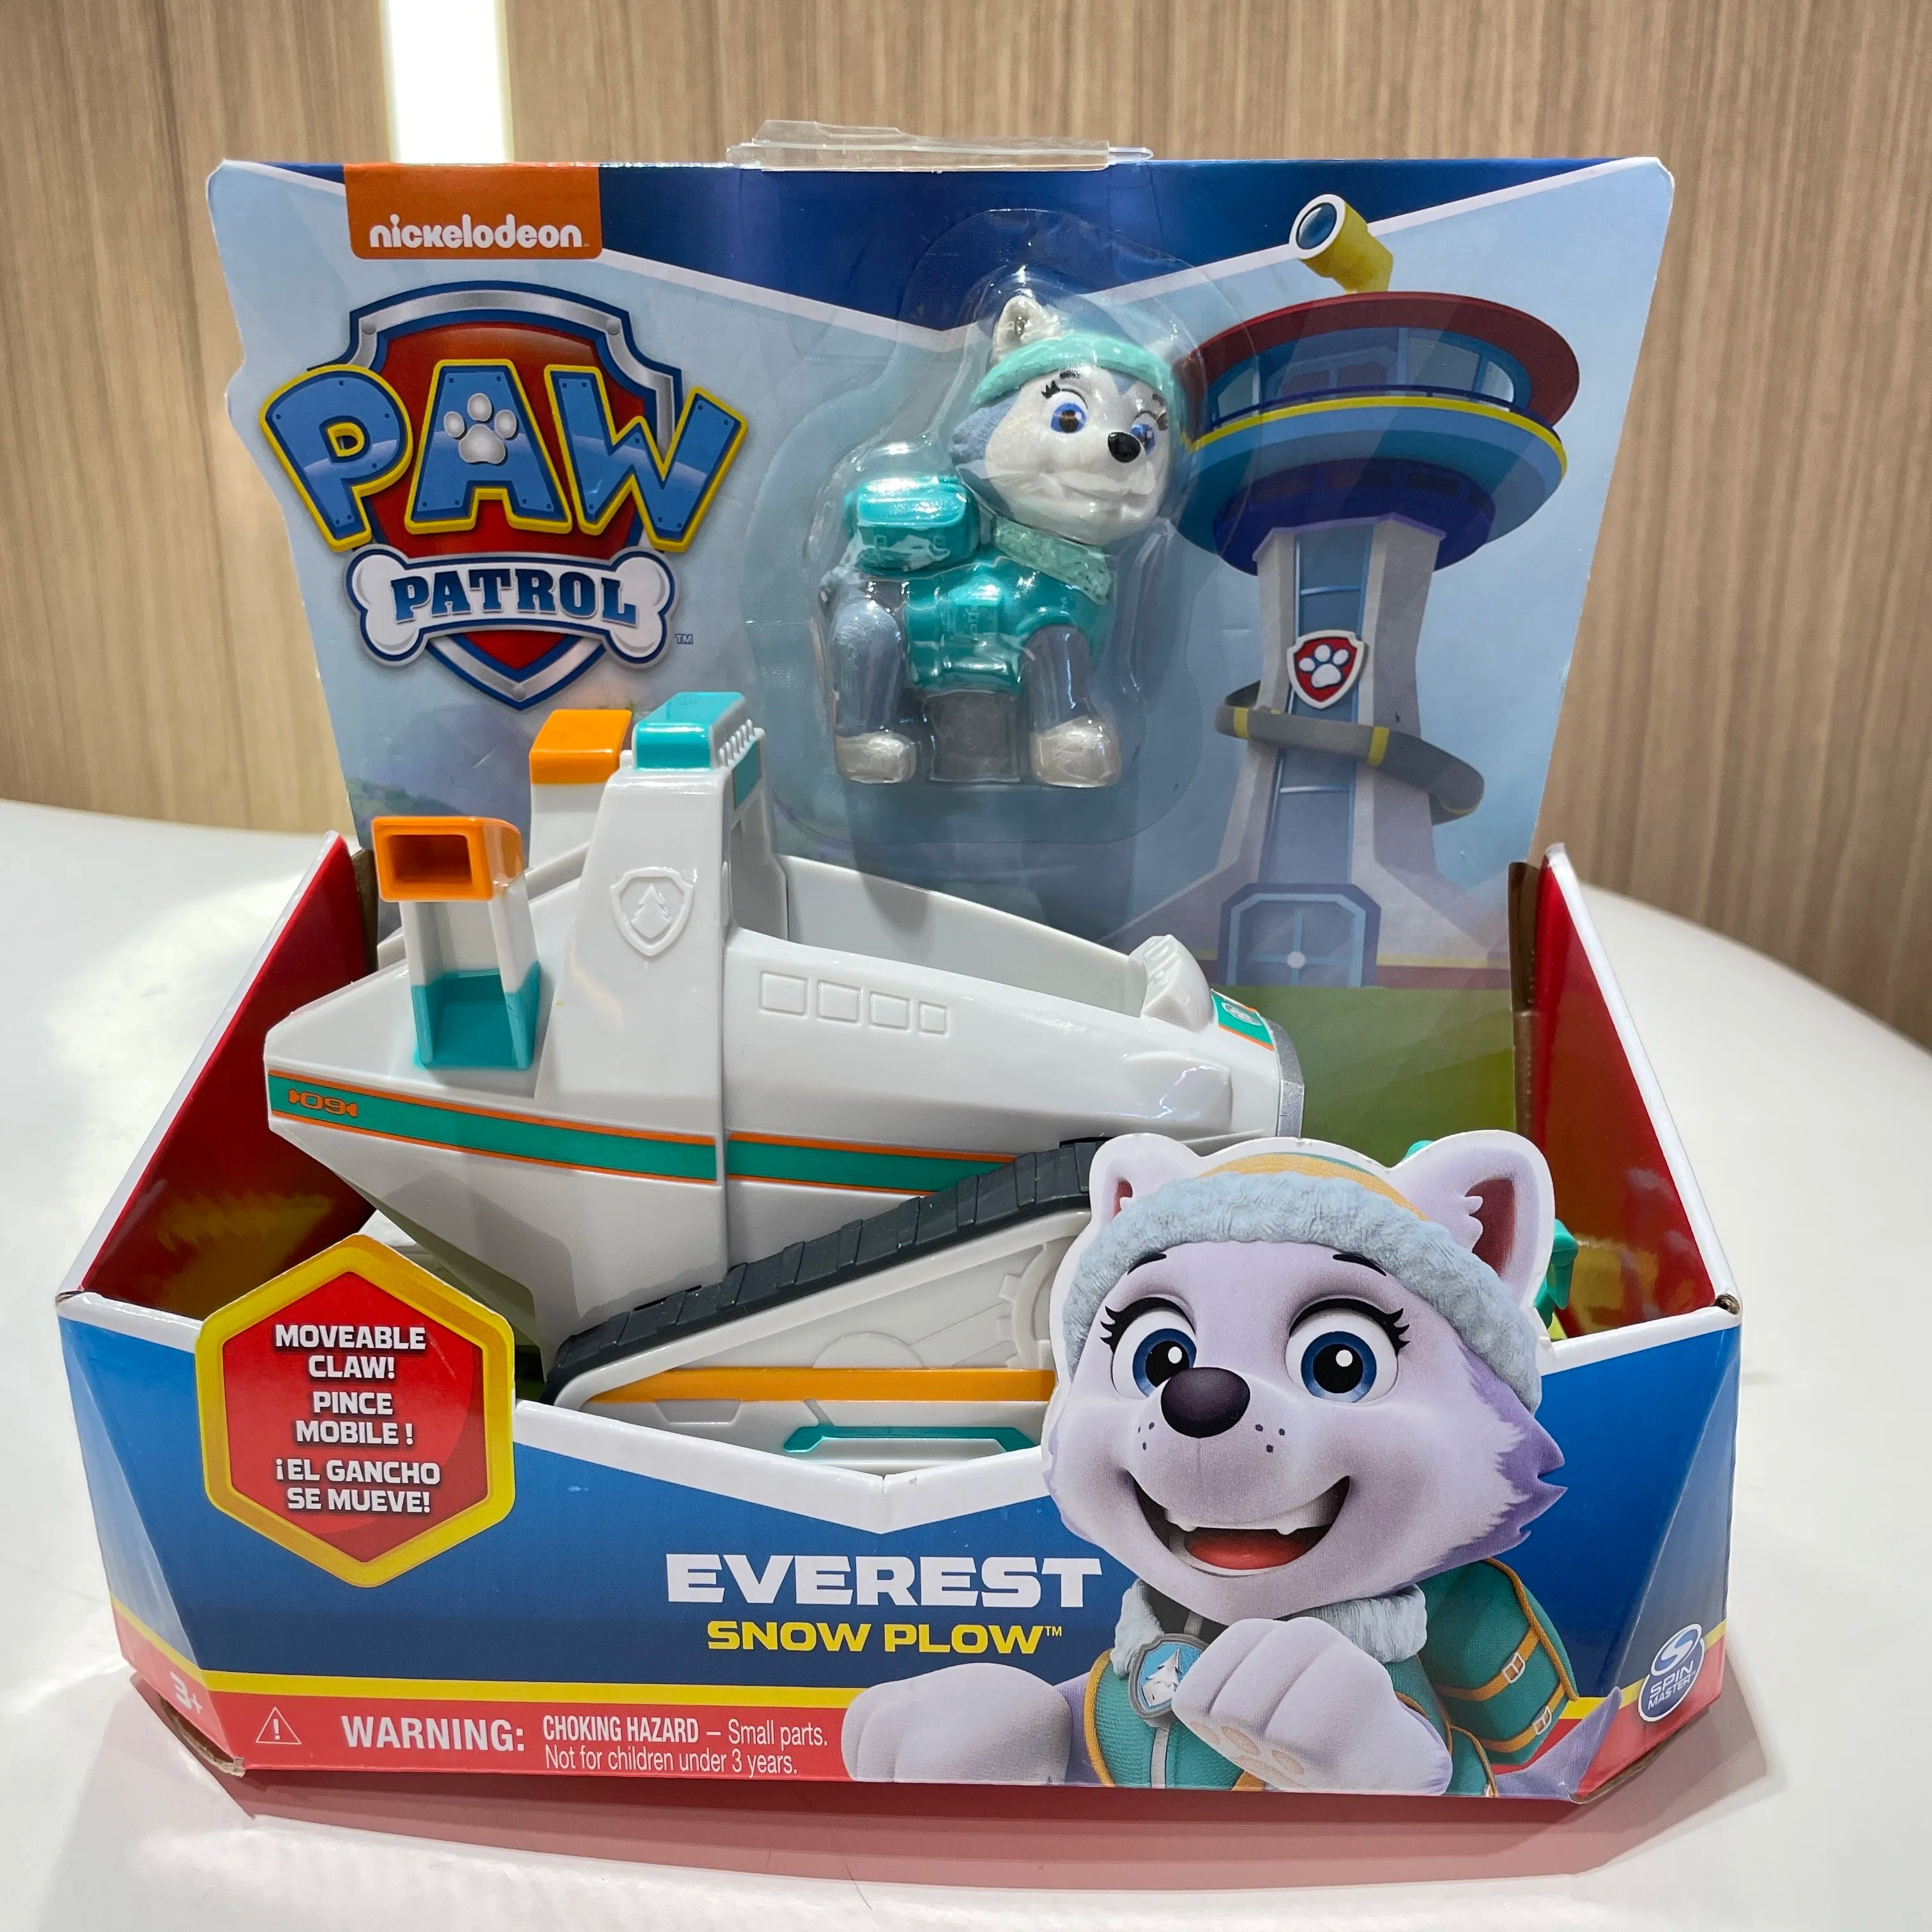 Original Paw Patrol Vehicle Car with Ryder, Tracker, Everest, Chase, Rex, Skye, Rocky, Marshall, and Zuma Action Figures - Perfect Birthday Gift Toy for Little Heroes!